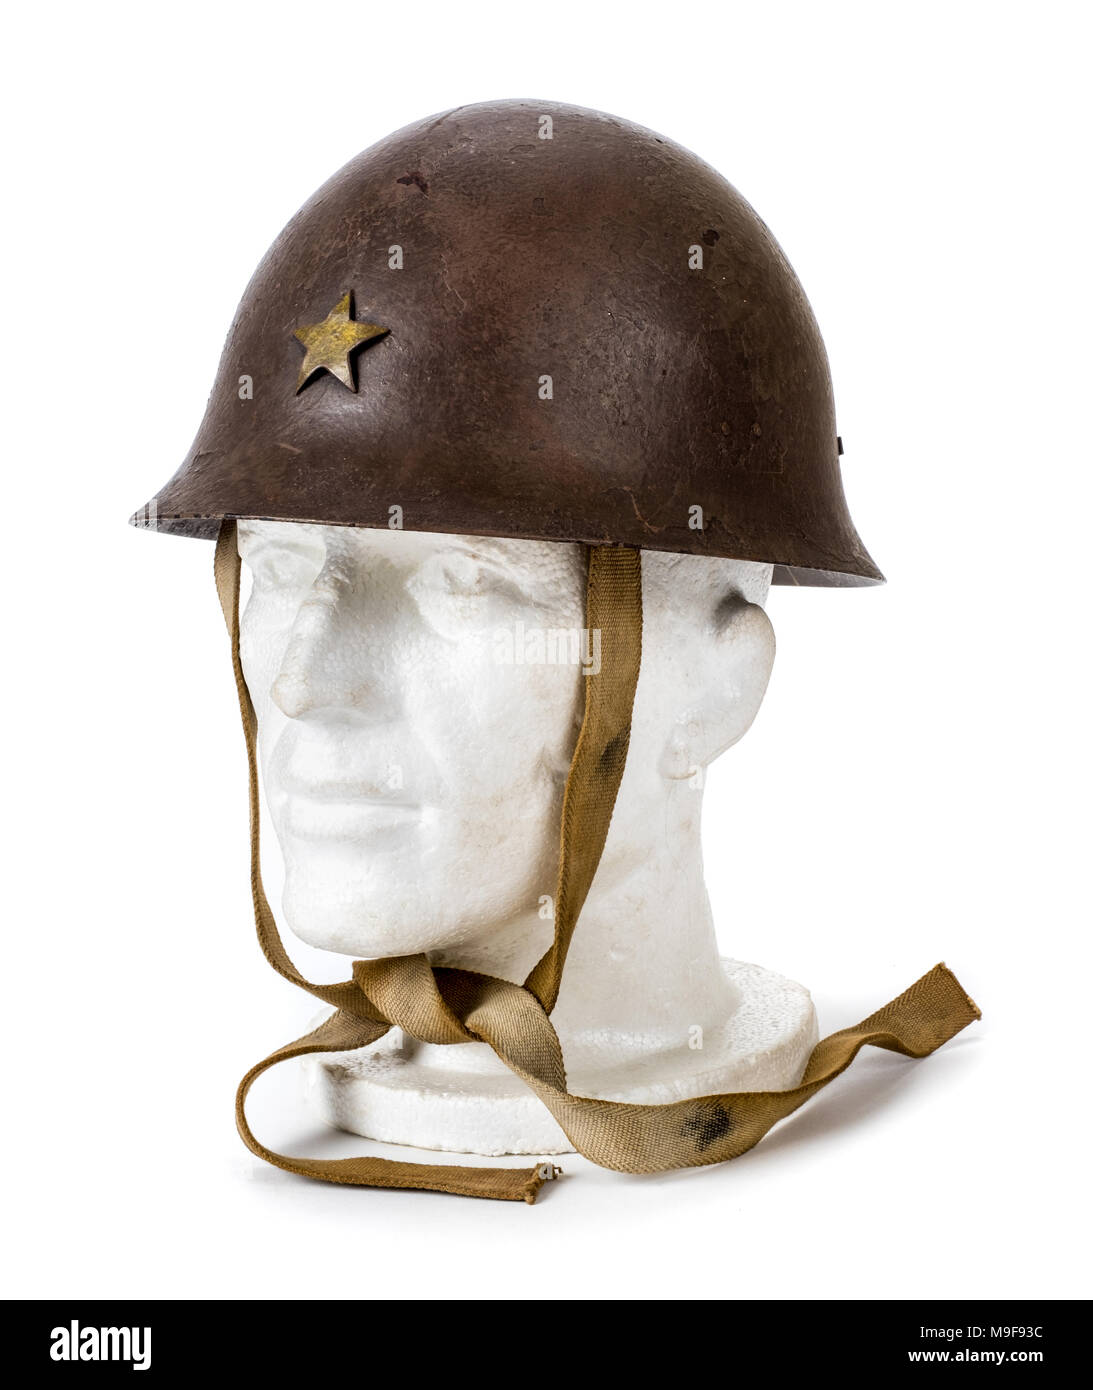 WW2 Japanese 'Type 90' steel combat helmet featuring the Infantry Star on the front Stock Photo